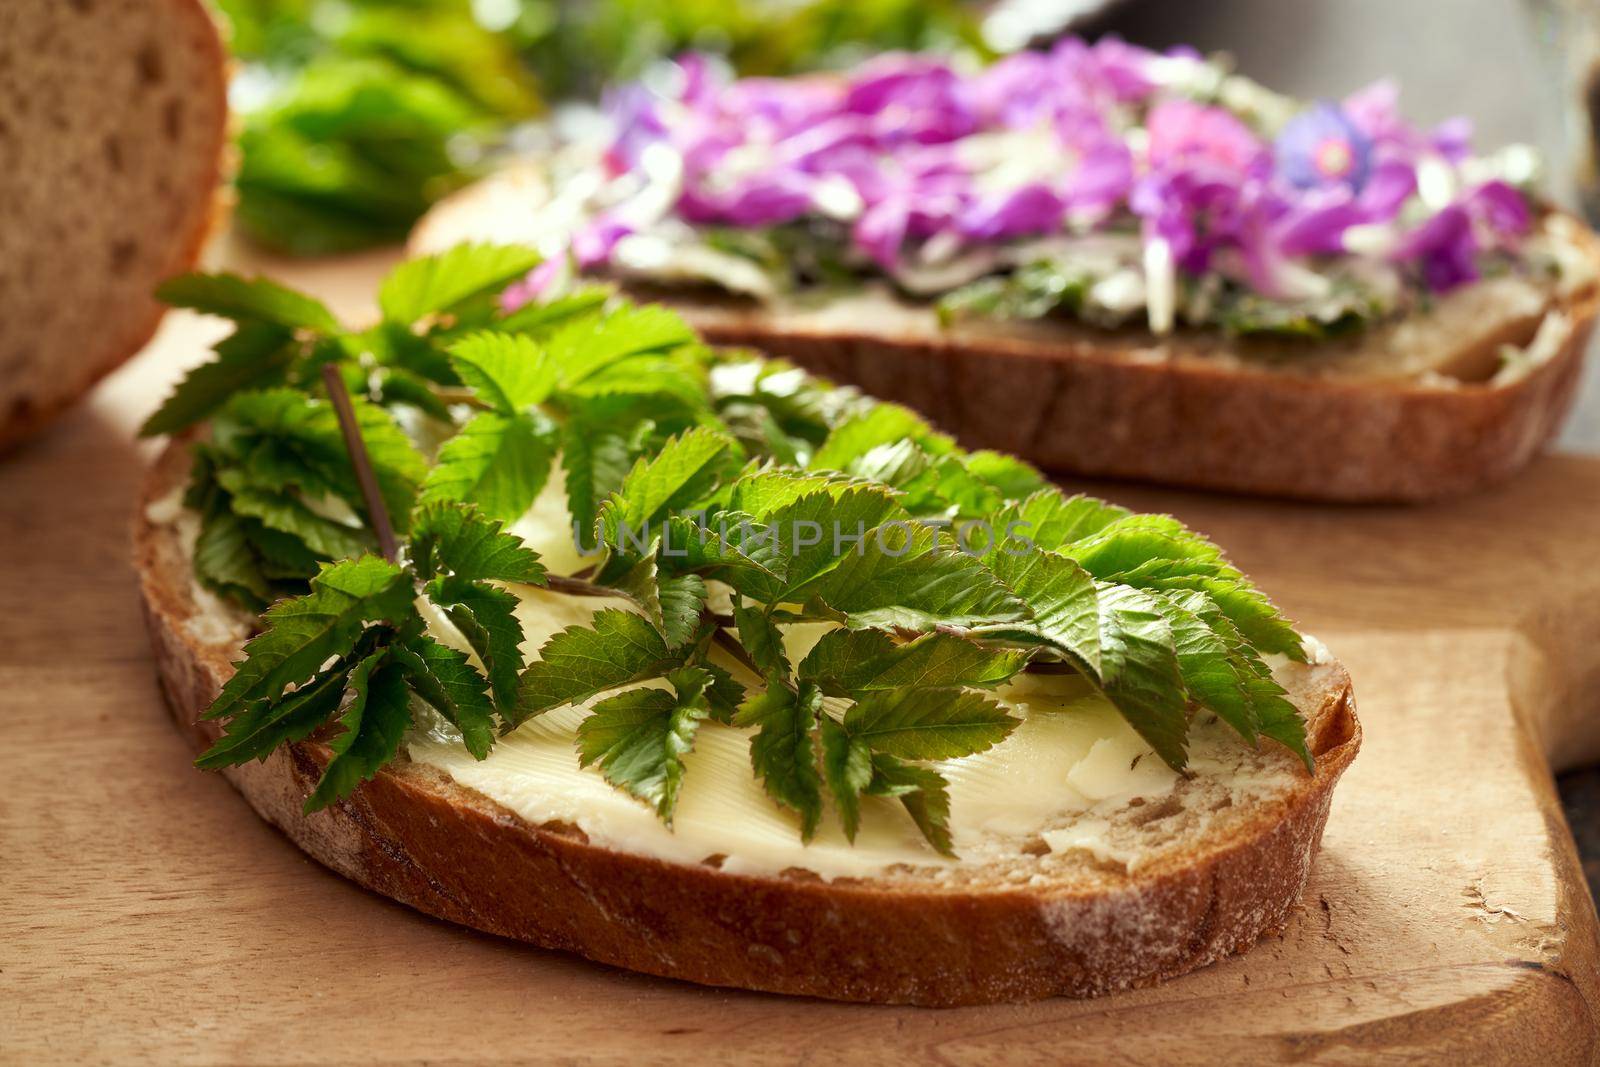 A slice of bread with young ground elder leaves - a wild edible plant , with bread with purple dead-nettle flowers in the background by madeleine_steinbach